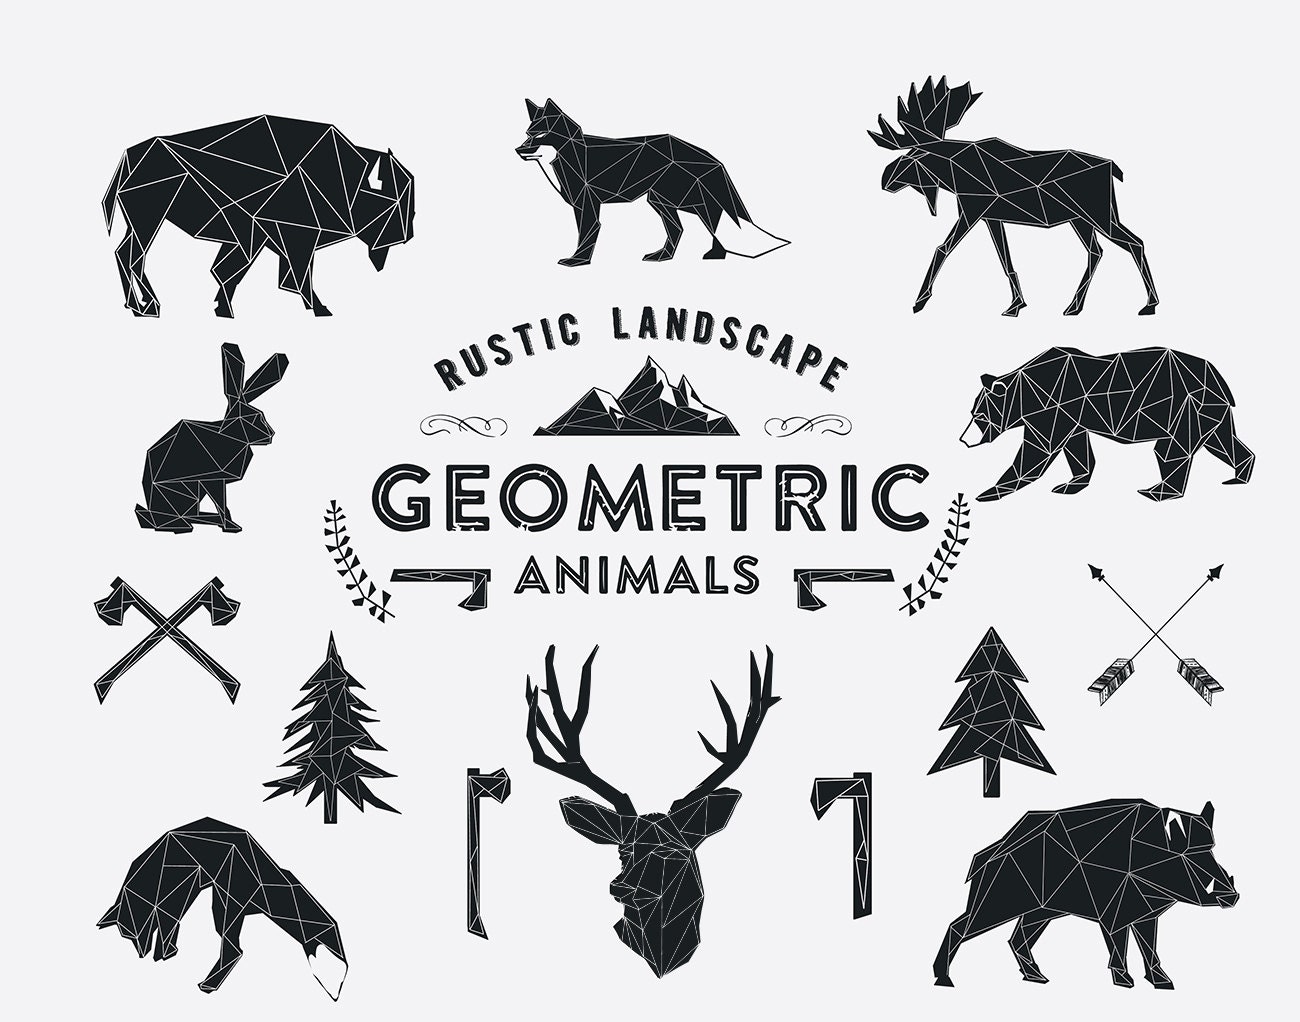 Download Geometric Animals wildlife and Rustic landscape Hand Drawn